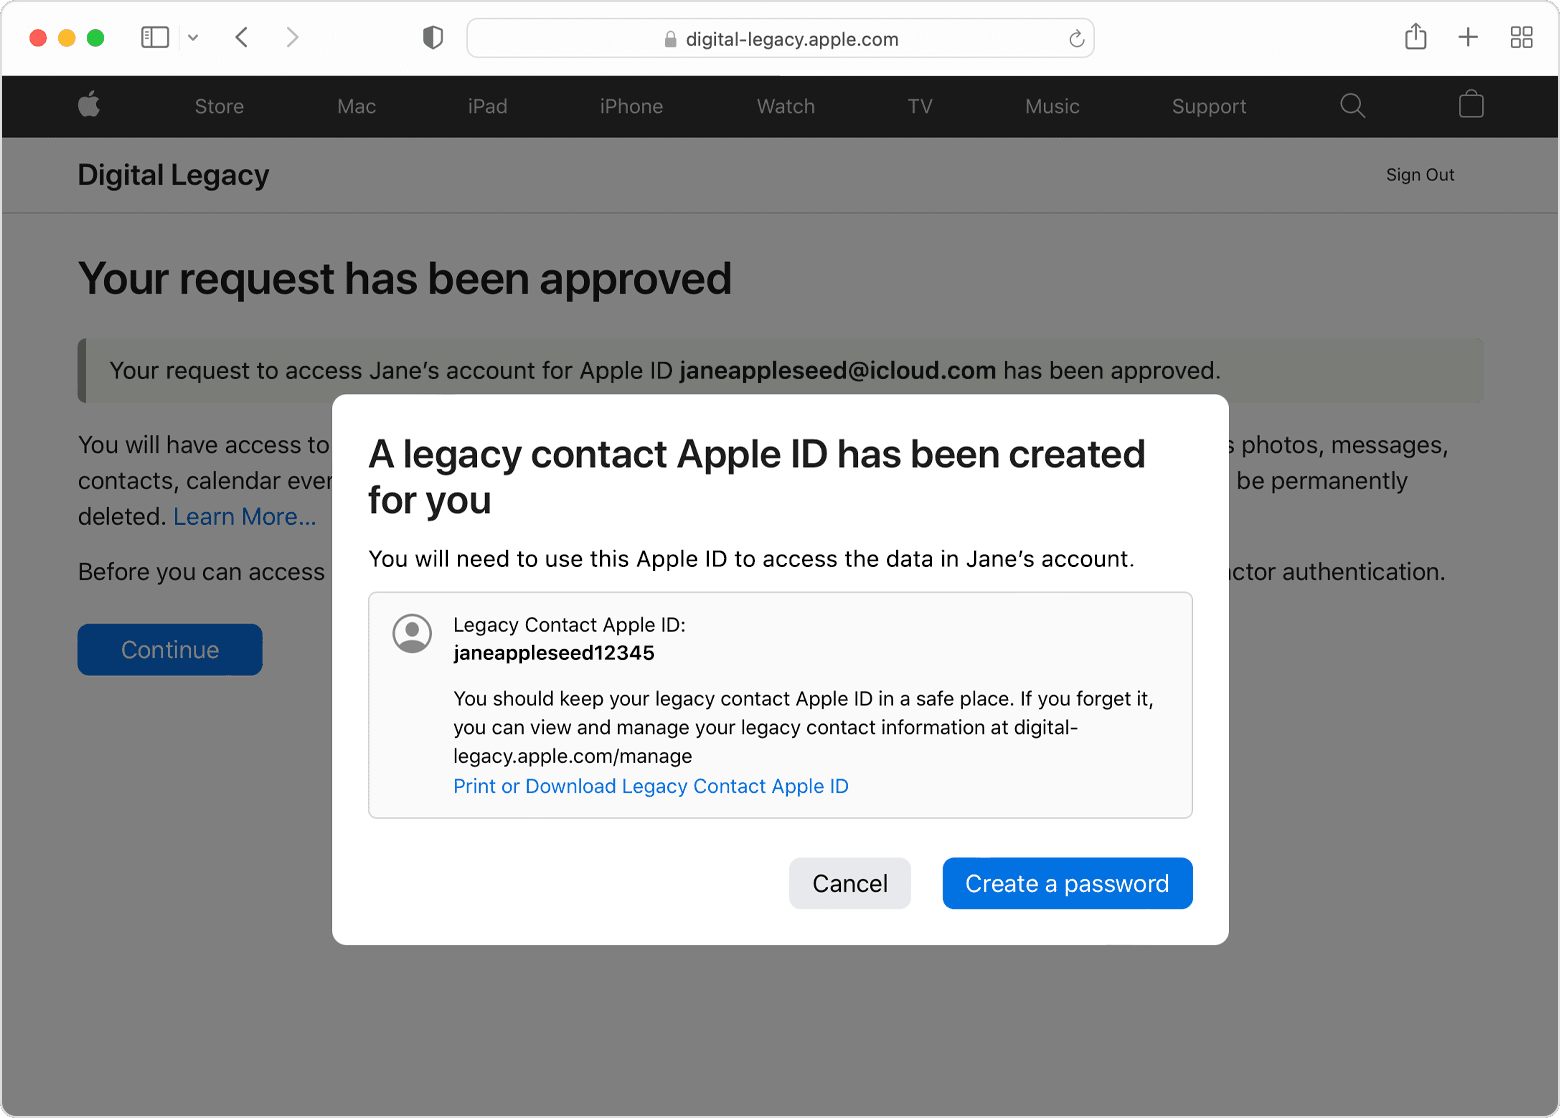 After your Legacy Contact request is approved, a message lets you know that a legacy contact Apple ID has been created for you. You can print or download this Legacy Contact Apple ID, or tap the blue Create a password button.